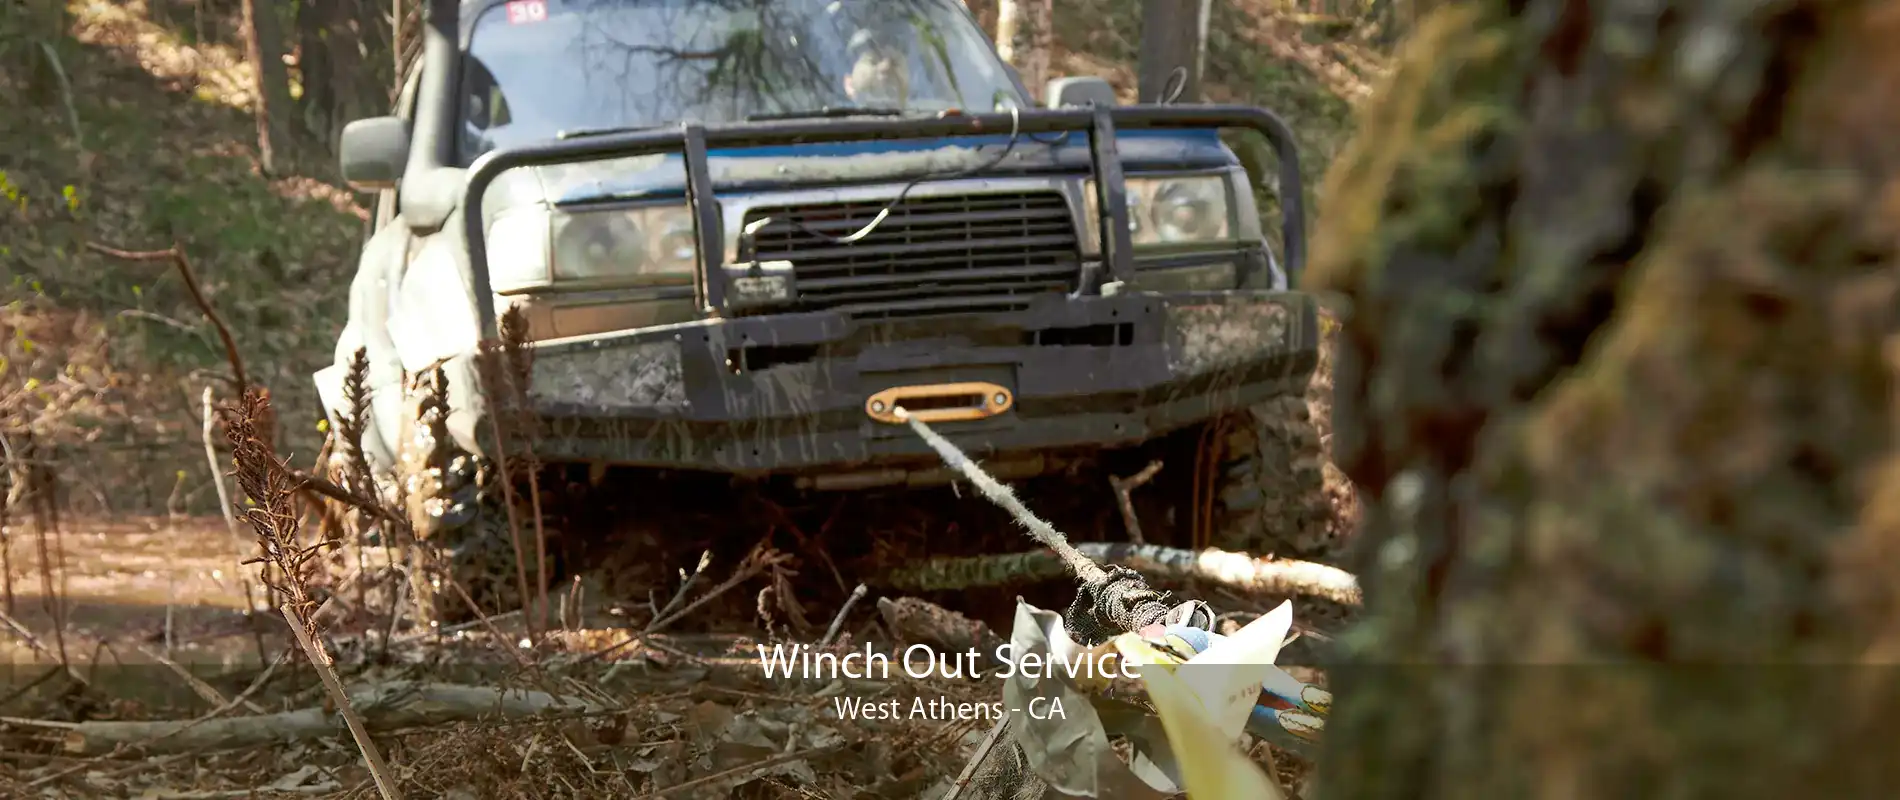 Winch Out Service West Athens - CA